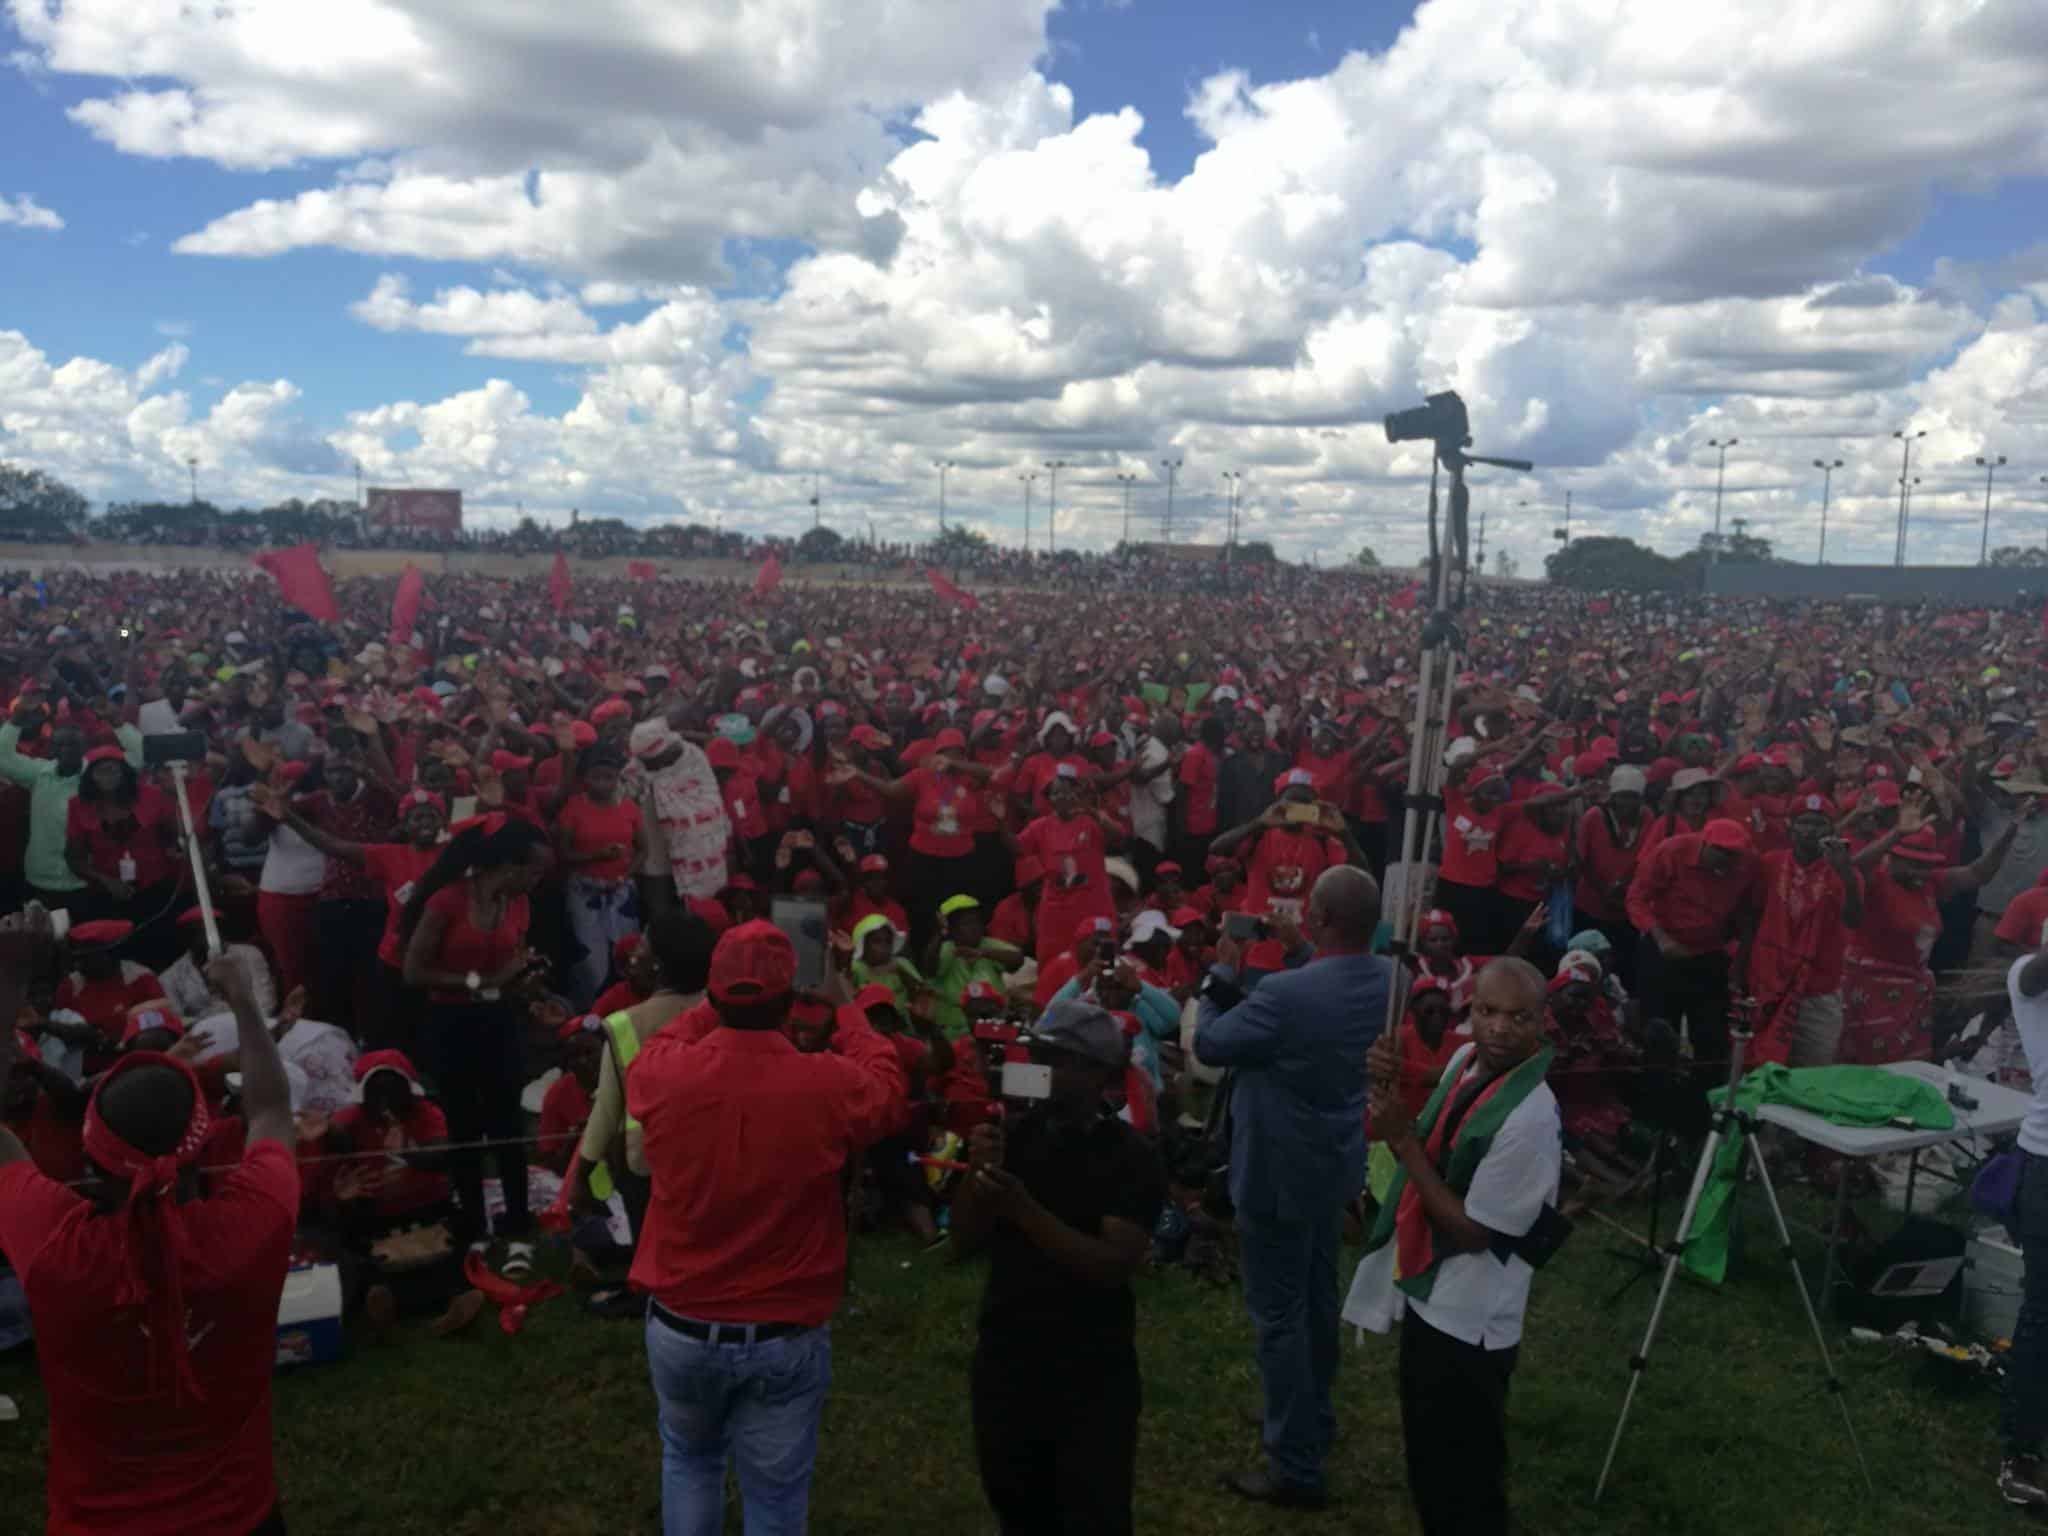 MASVINGO: CIOs Besiege Residence of Chamisa’s Youth Leader